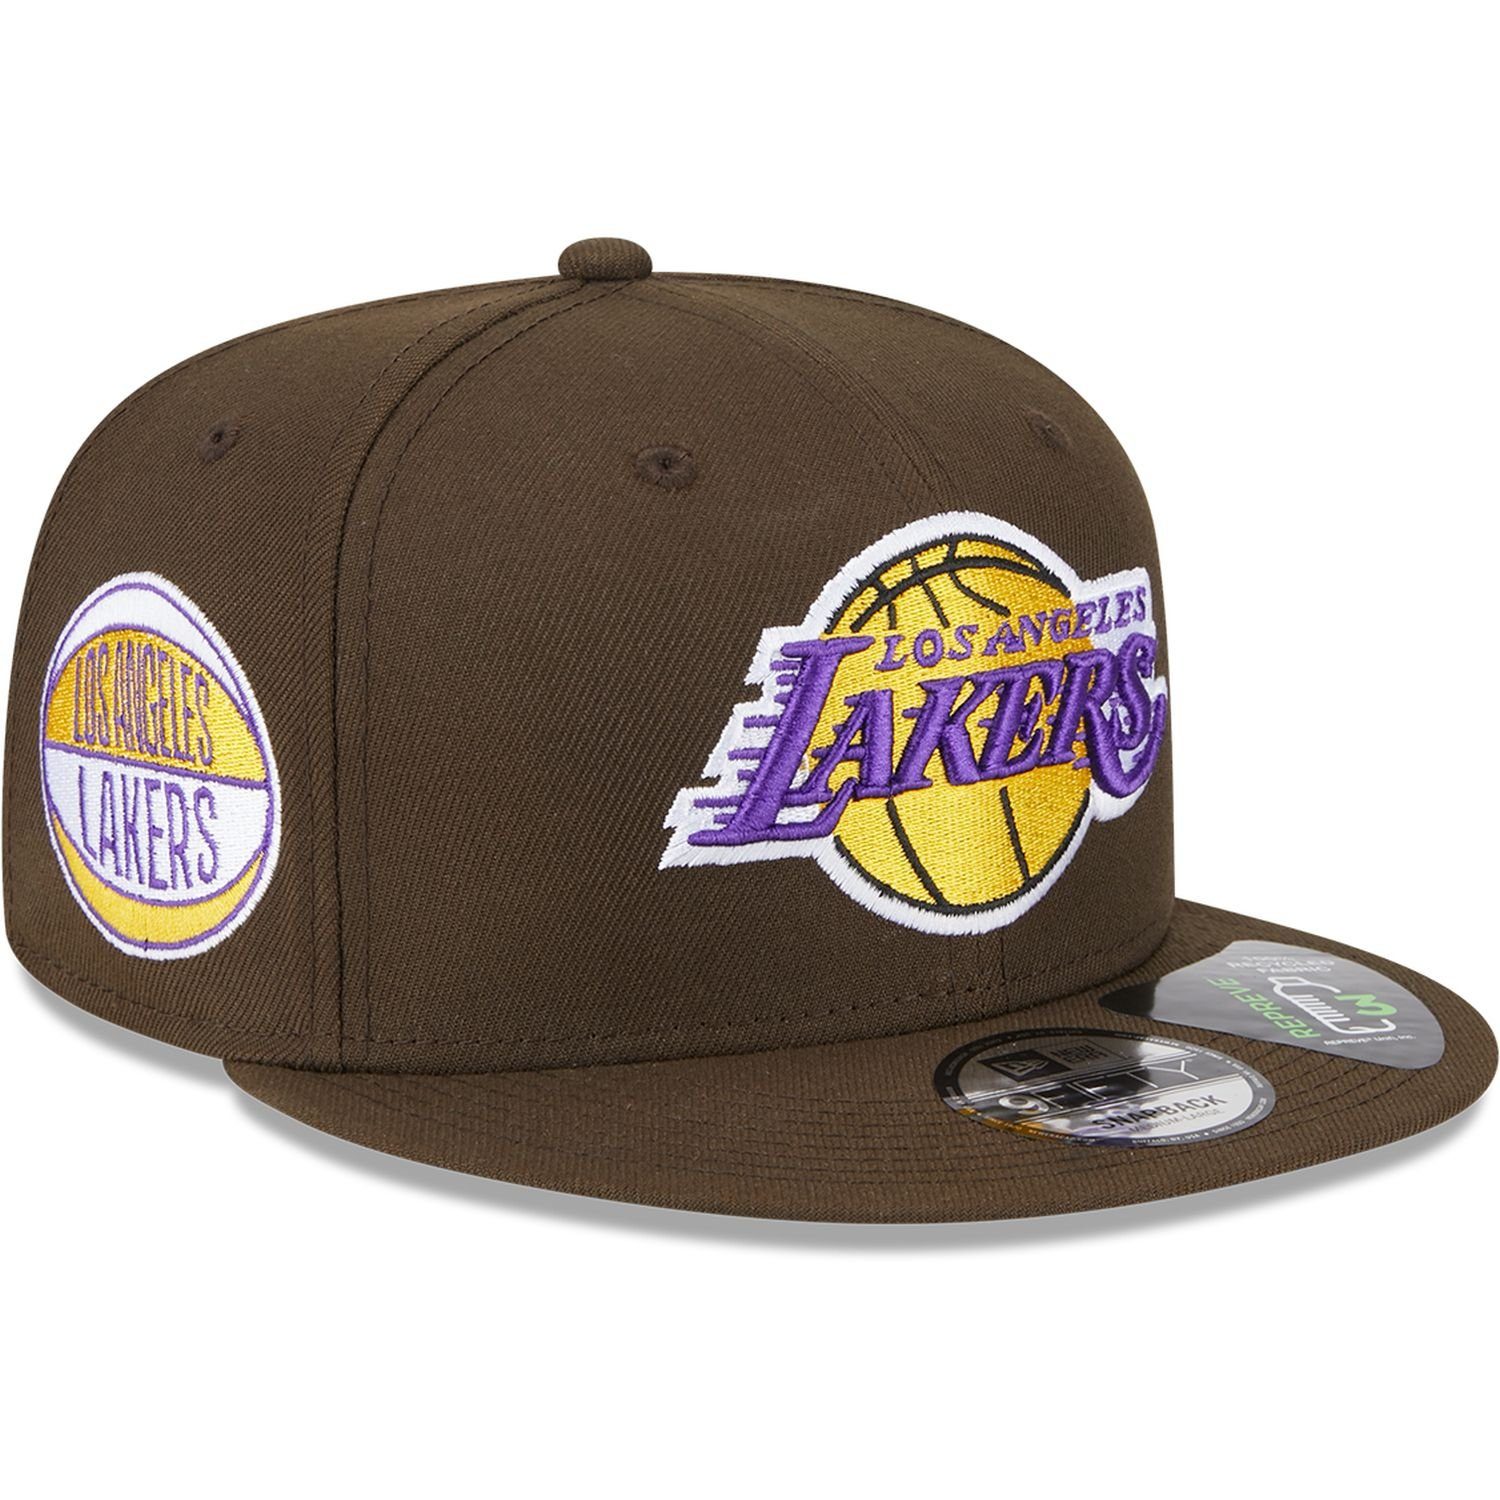 New Era Snapback Cap 9Fifty SIDEPATCH Los Angeles Lakers